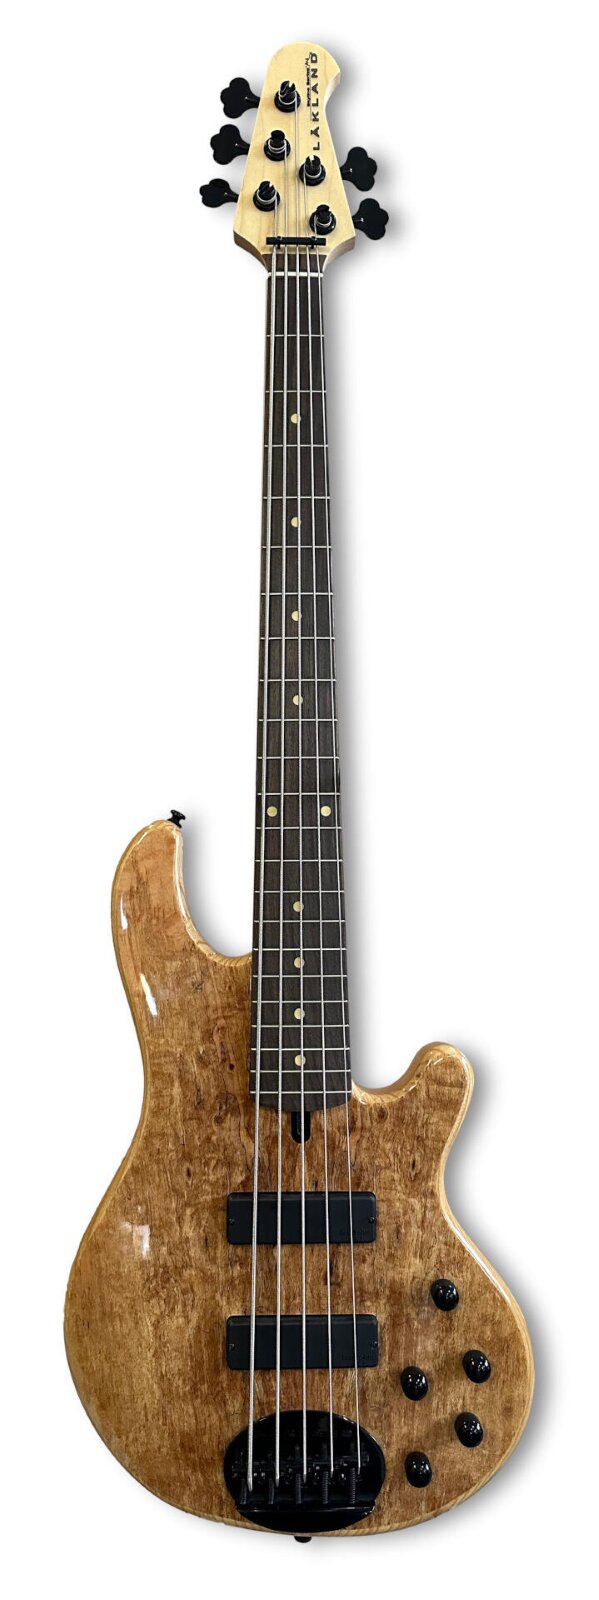 LAKLAND Skyline 55-01 Deluxe Bass, 5-String - Spalted Maple Top, Natural Gloss : photo 1